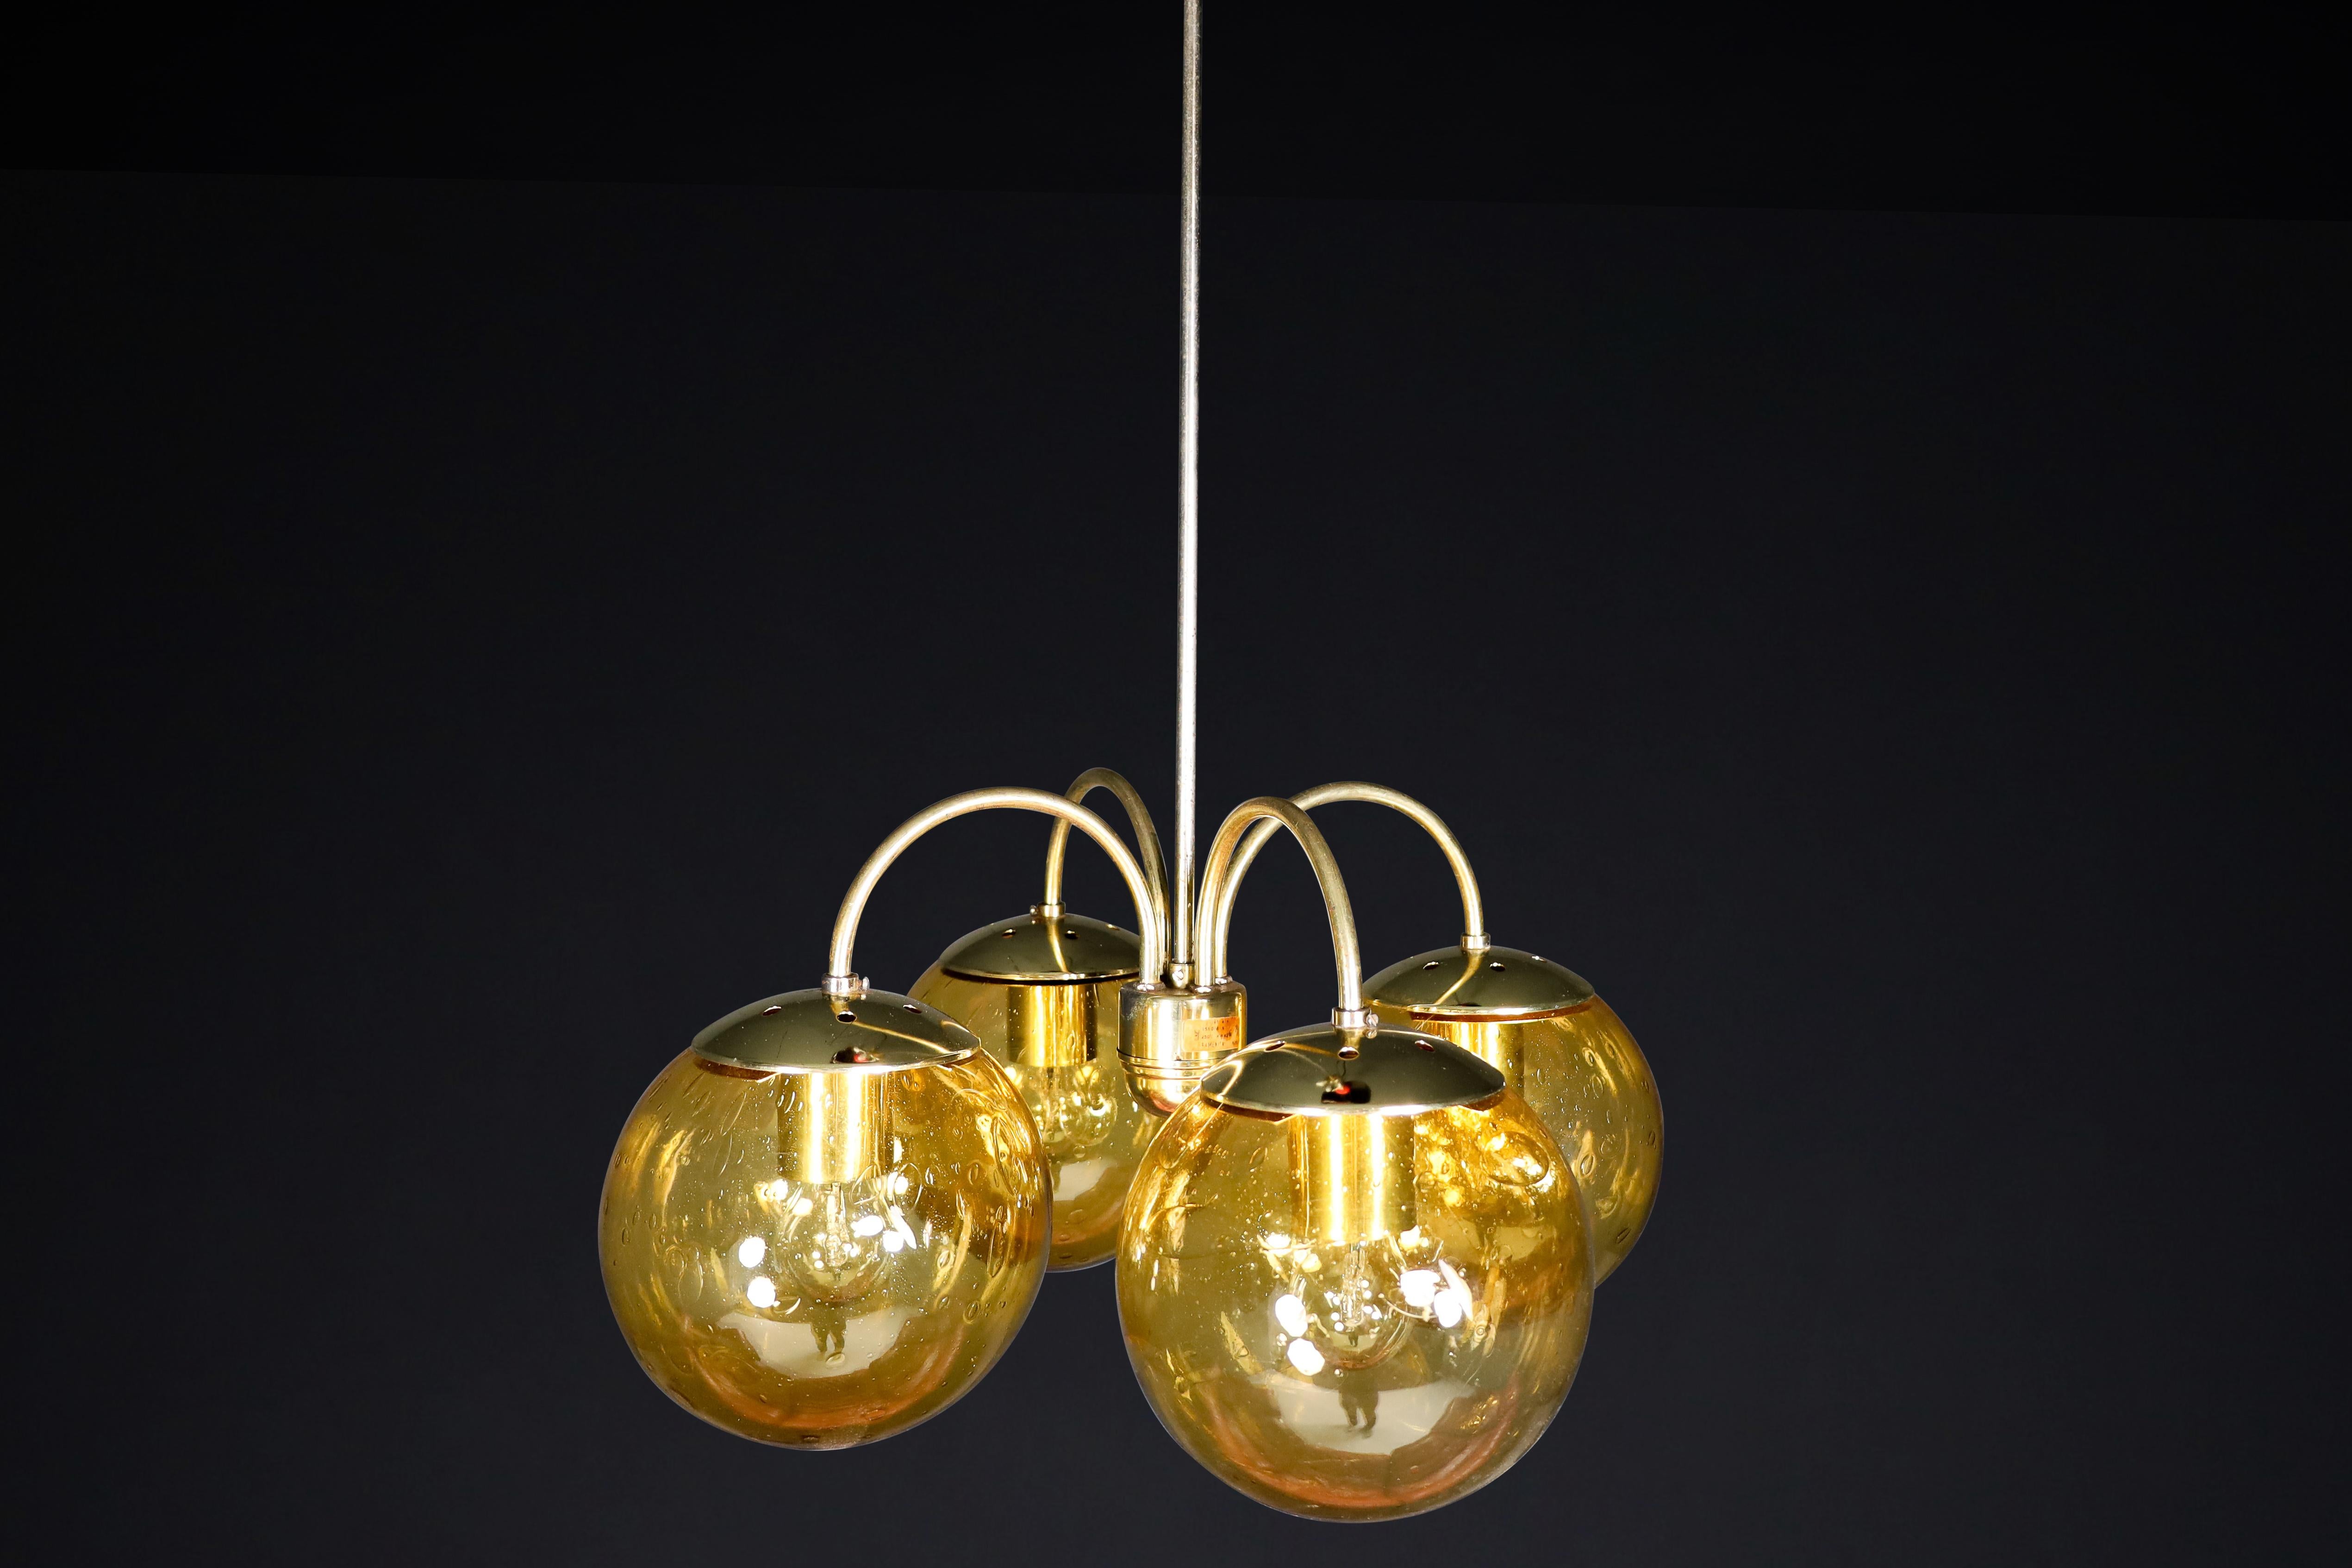 Midcentury Chandeliers in Brass and Amber-Colored Glass Czech Republic, 1960s For Sale 6